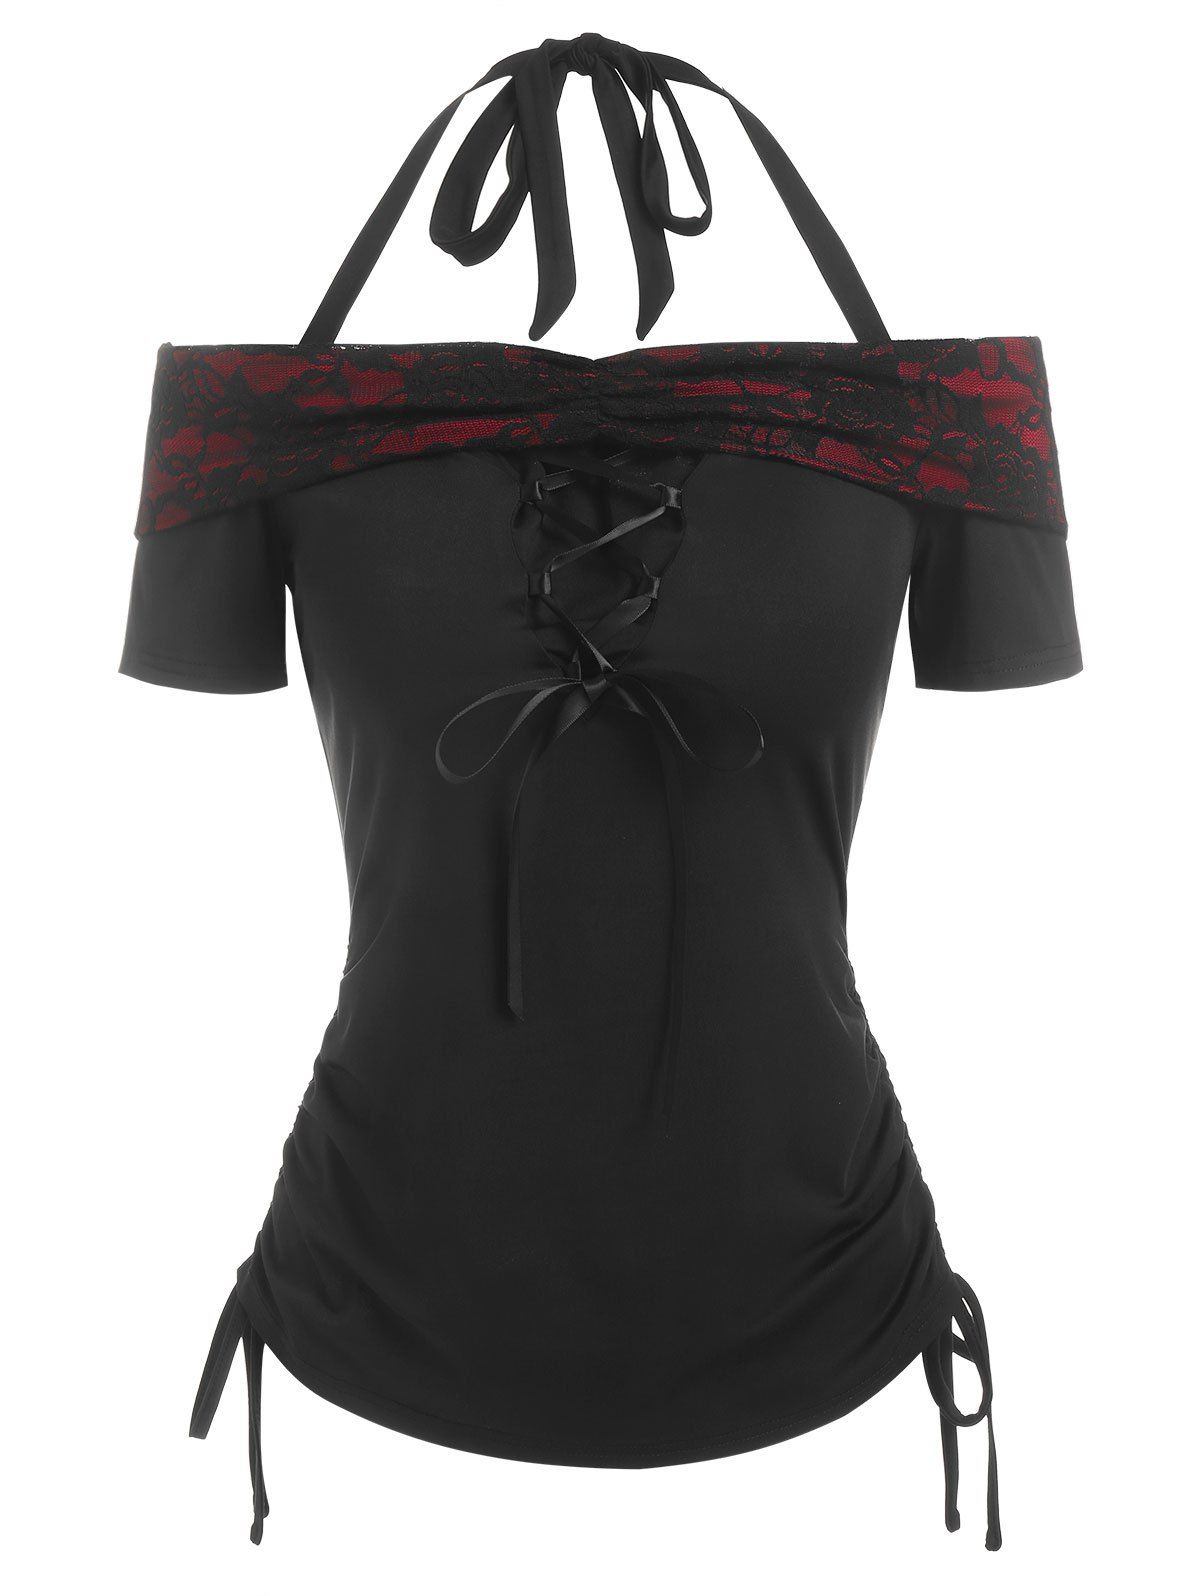 Gothic Halter Cinched Lace Up Tee - BLACK M